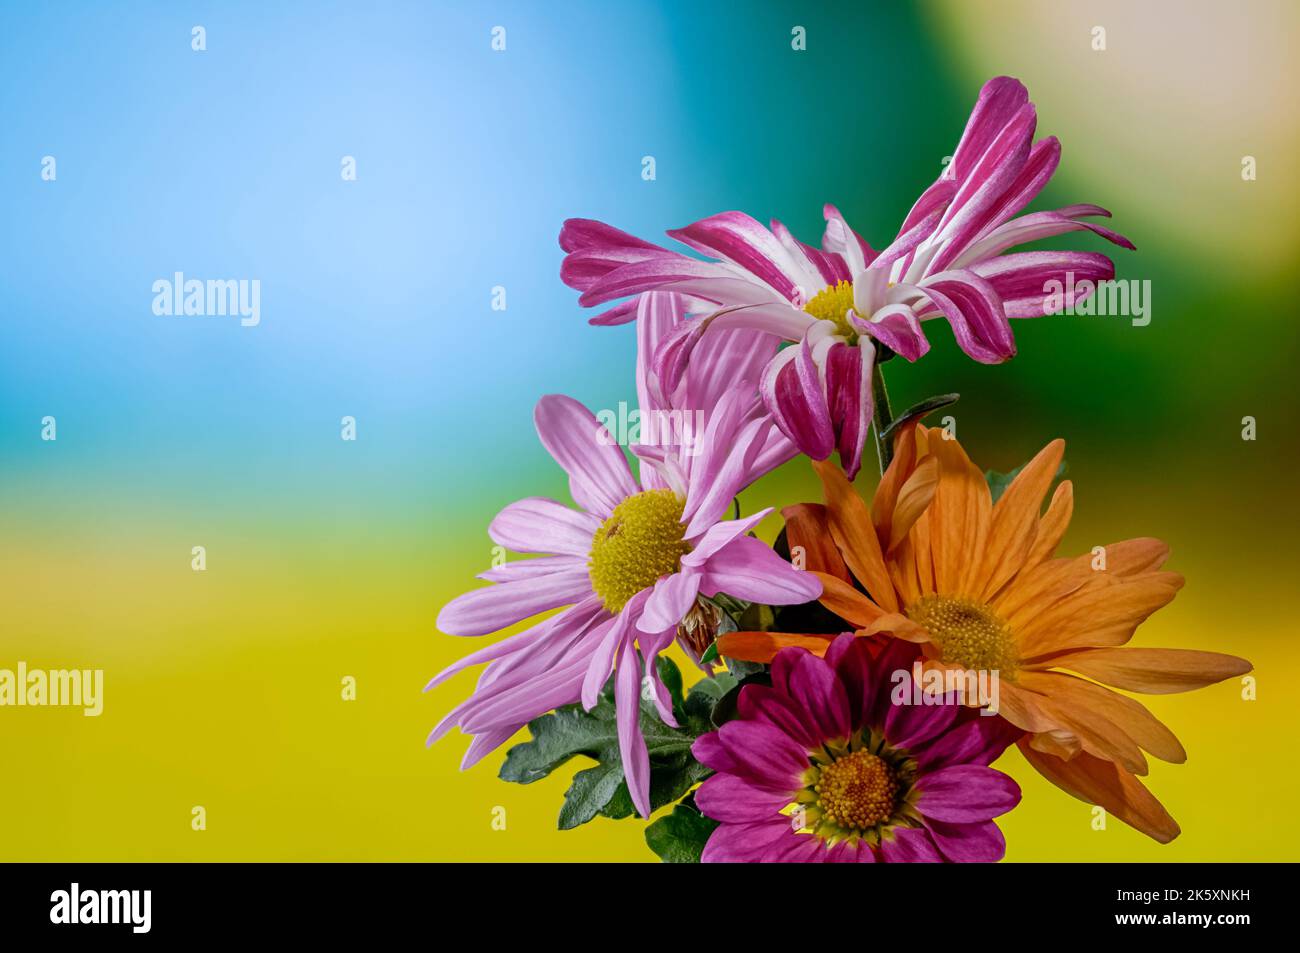 colorful chrysanthemums, blooming flowers from close range on a delicate blurred background, purple, white, orange inflorescence, space for text Stock Photo